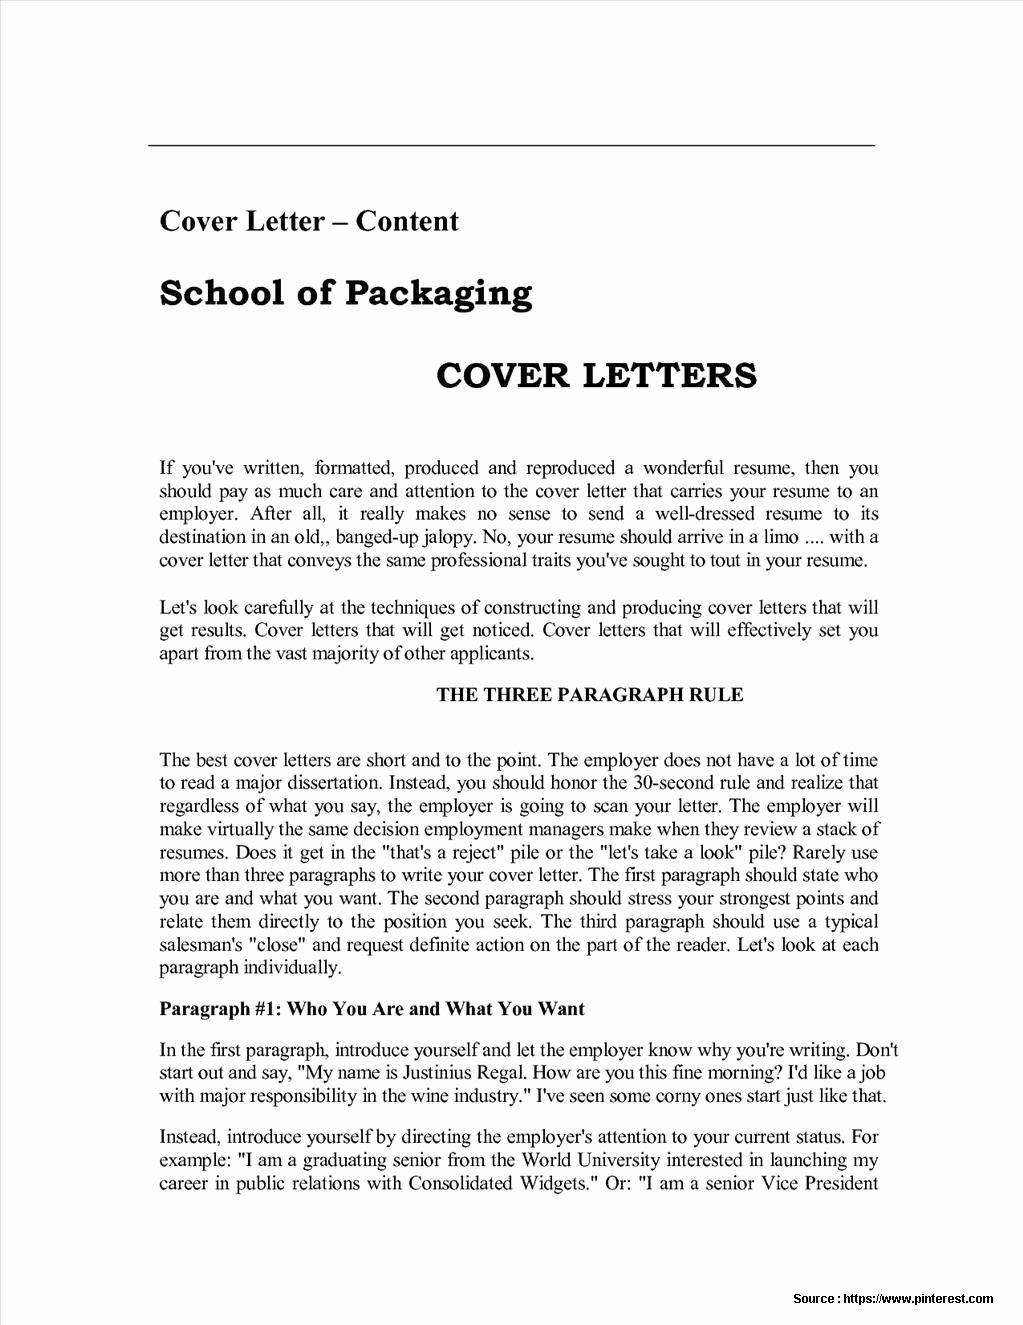 sample resume and cover letter pdf